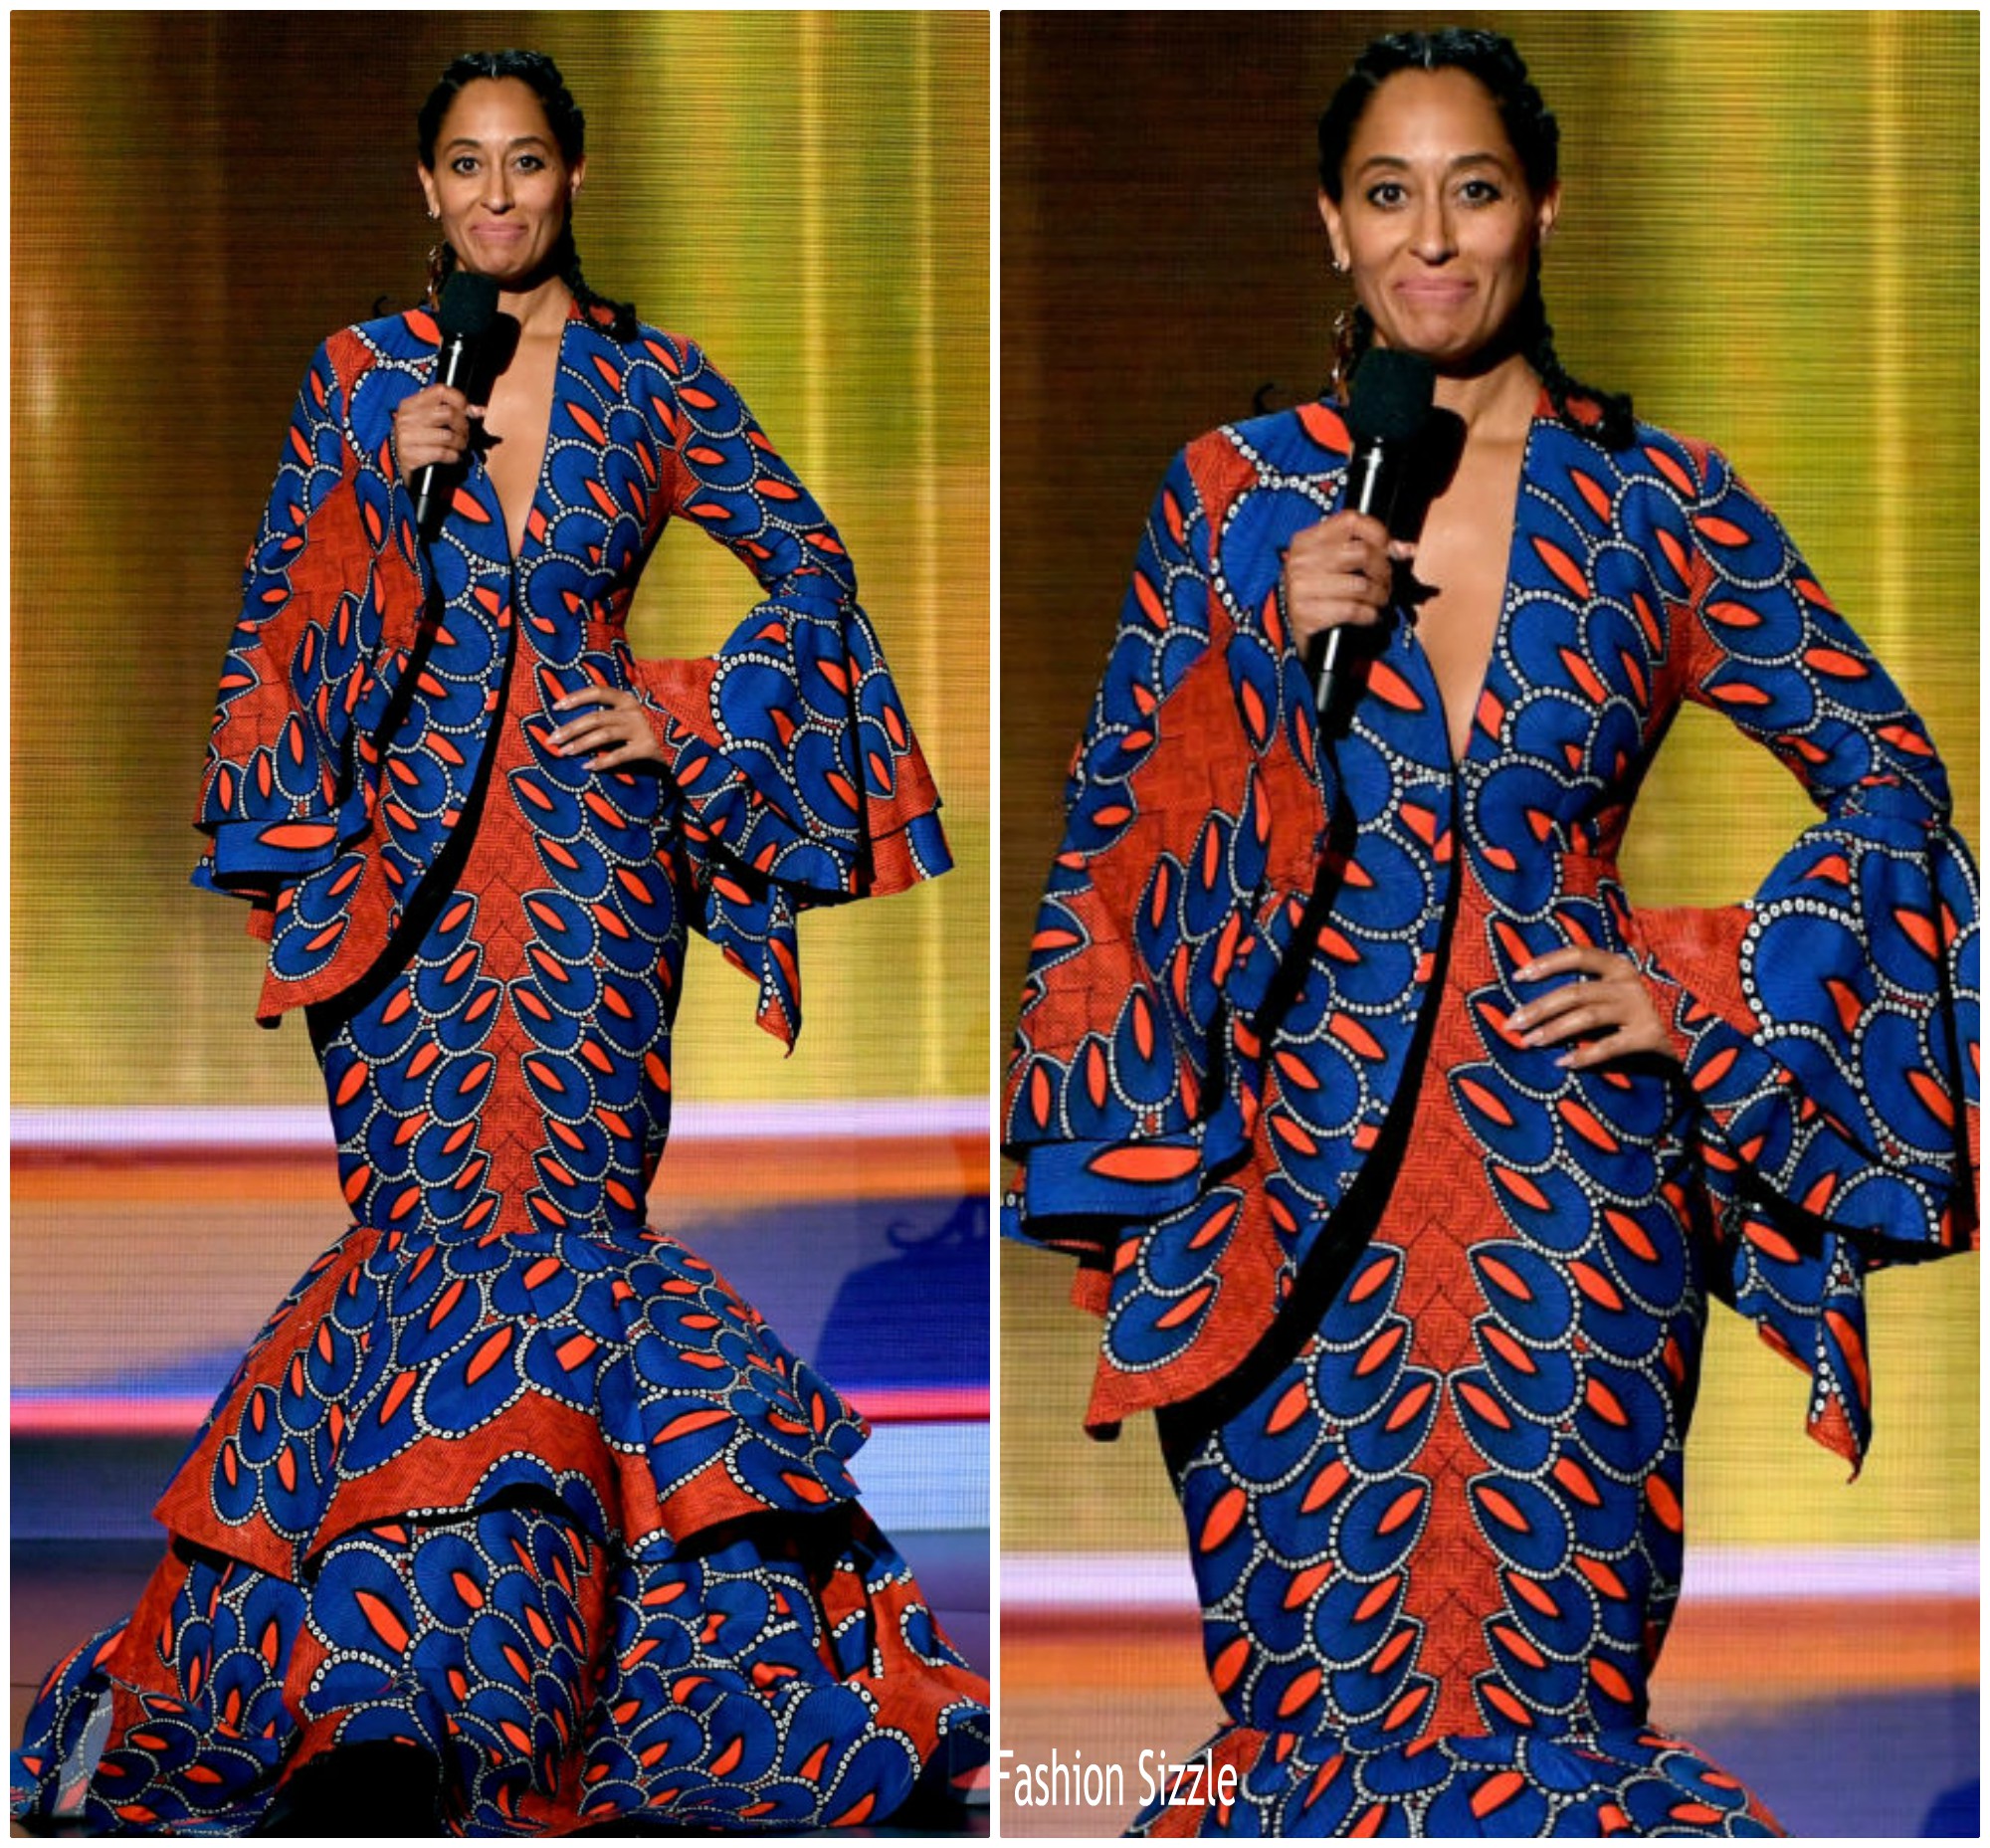 tracee-ellis-ross-in-laive-by-ck-hosting-2018-american-music-awards